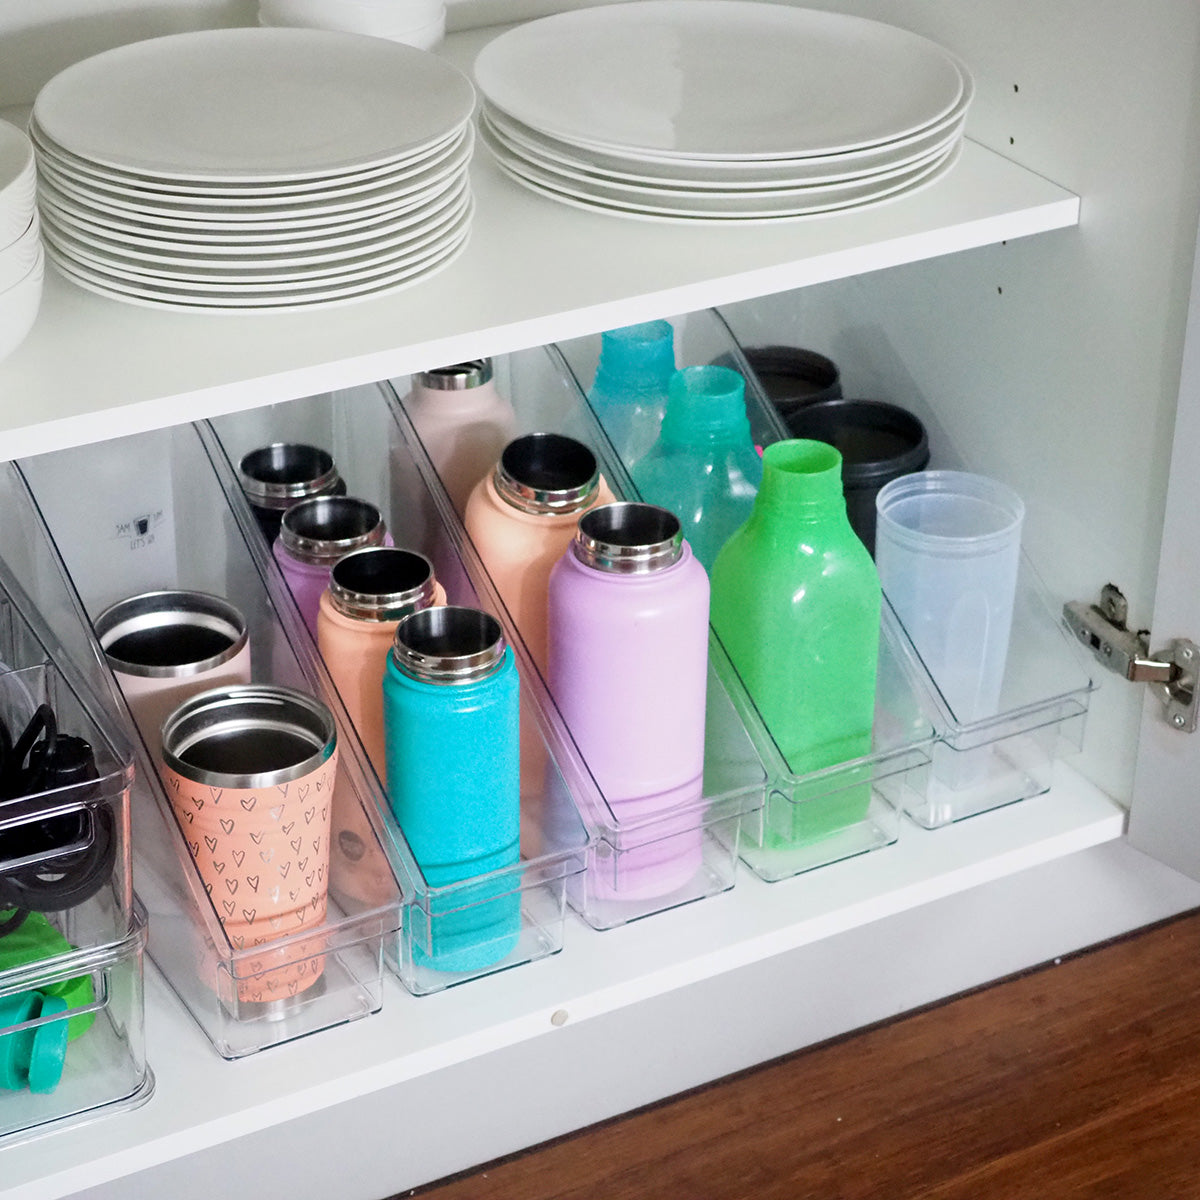 Kitchen storage idea for cups and drink bottles cupboard - The